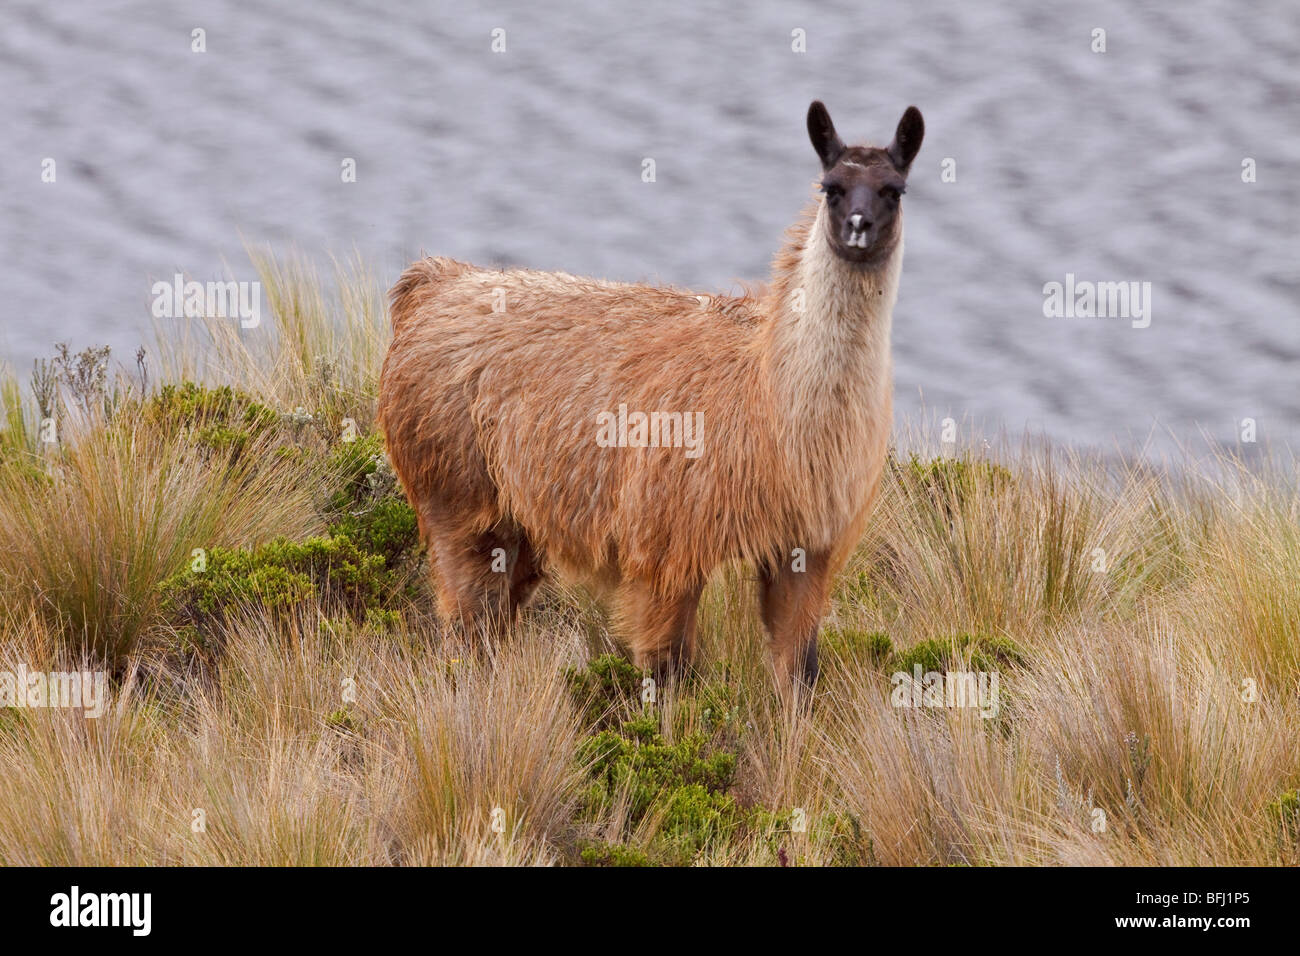 A Llama feeding on the grass in Cajas National Park in southern Ecuador. Stock Photo